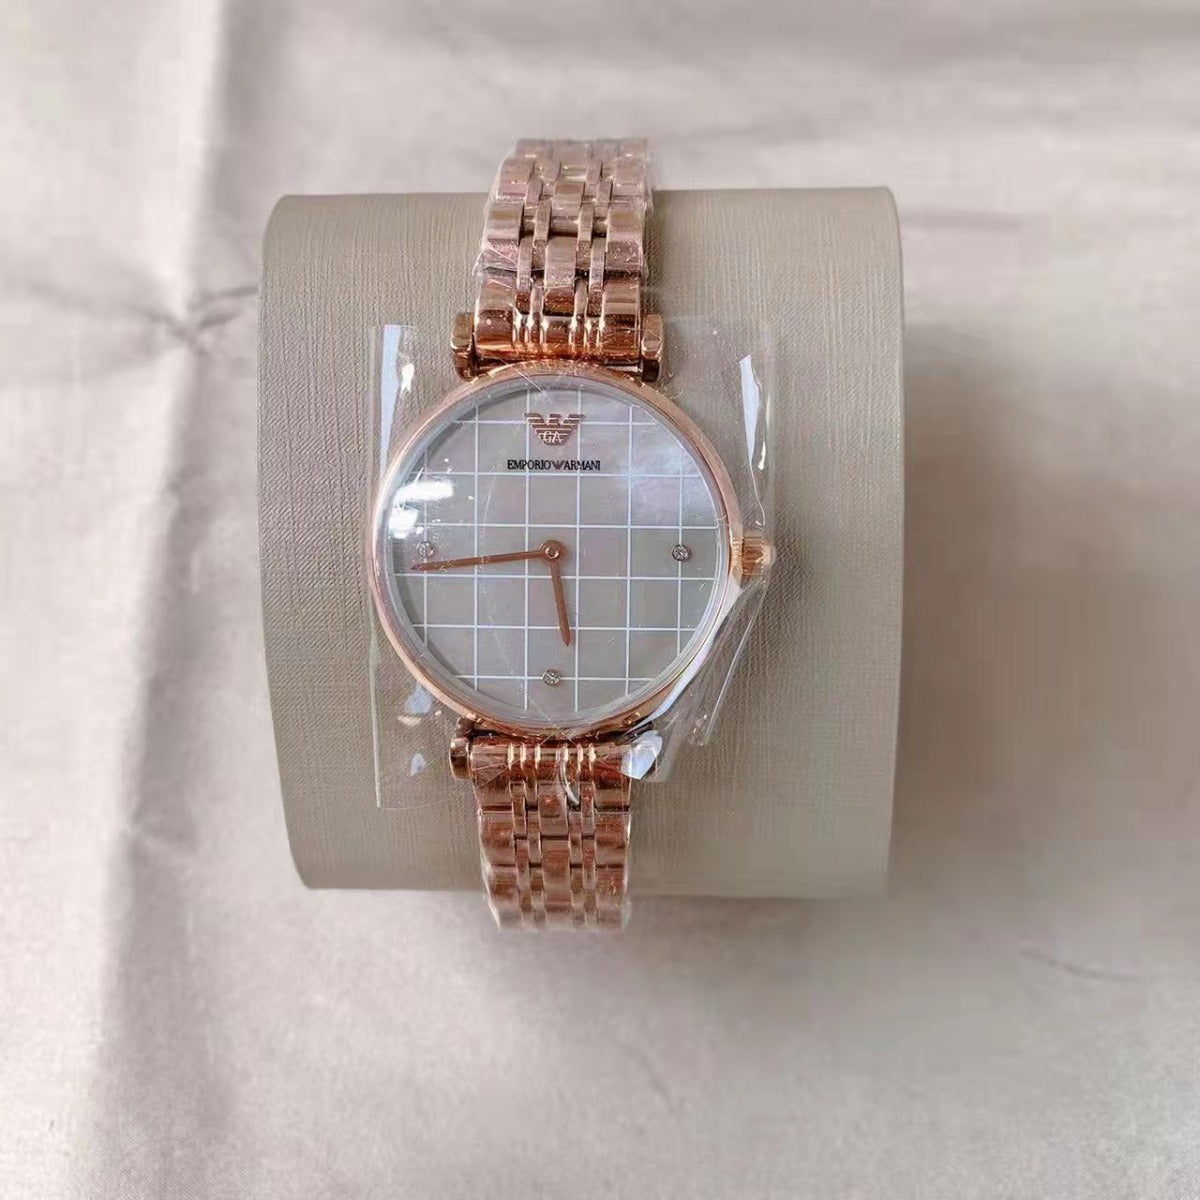 Emporio Armani AR11385 Two-Hand Rose Gold-Tone Stainless Steel Watch 723763296342